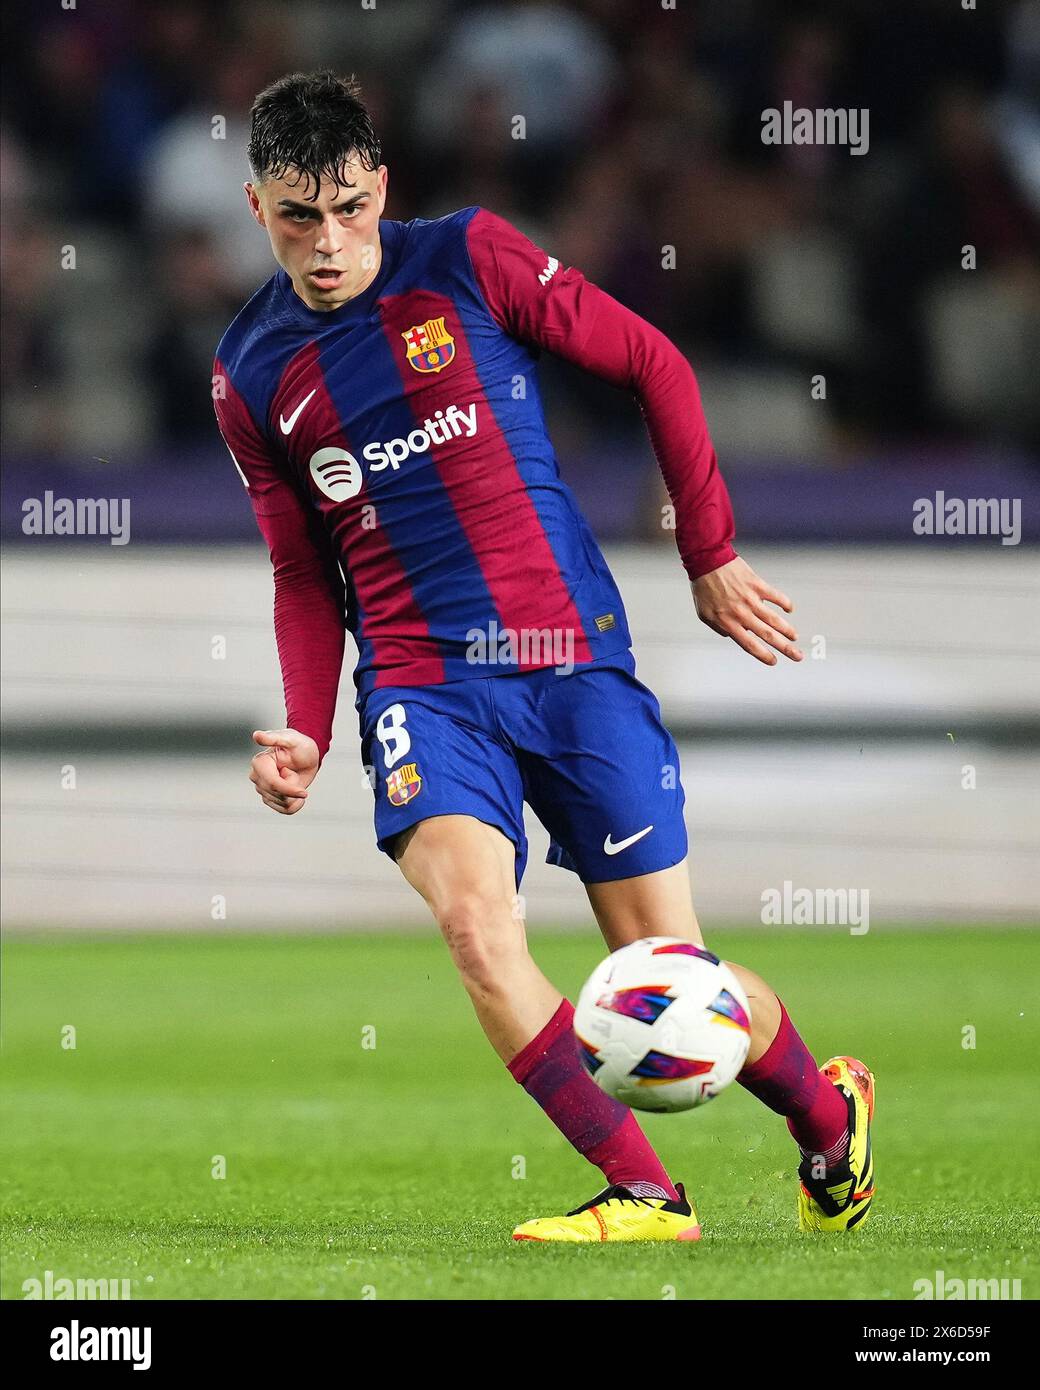 Barcelona, Spain. 13th May, 2024. Pedro Gonzalez Pedri of FC Barcelona during the La Liga EA Sports match between FC Barcelona and Real Sociedad played at Lluis Companys Stadium on May 13, 2024 in Barcelona, Spain. (Photo by Sergio Ruiz/PRESSINPHOTO) Credit: PRESSINPHOTO SPORTS AGENCY/Alamy Live News Stock Photo